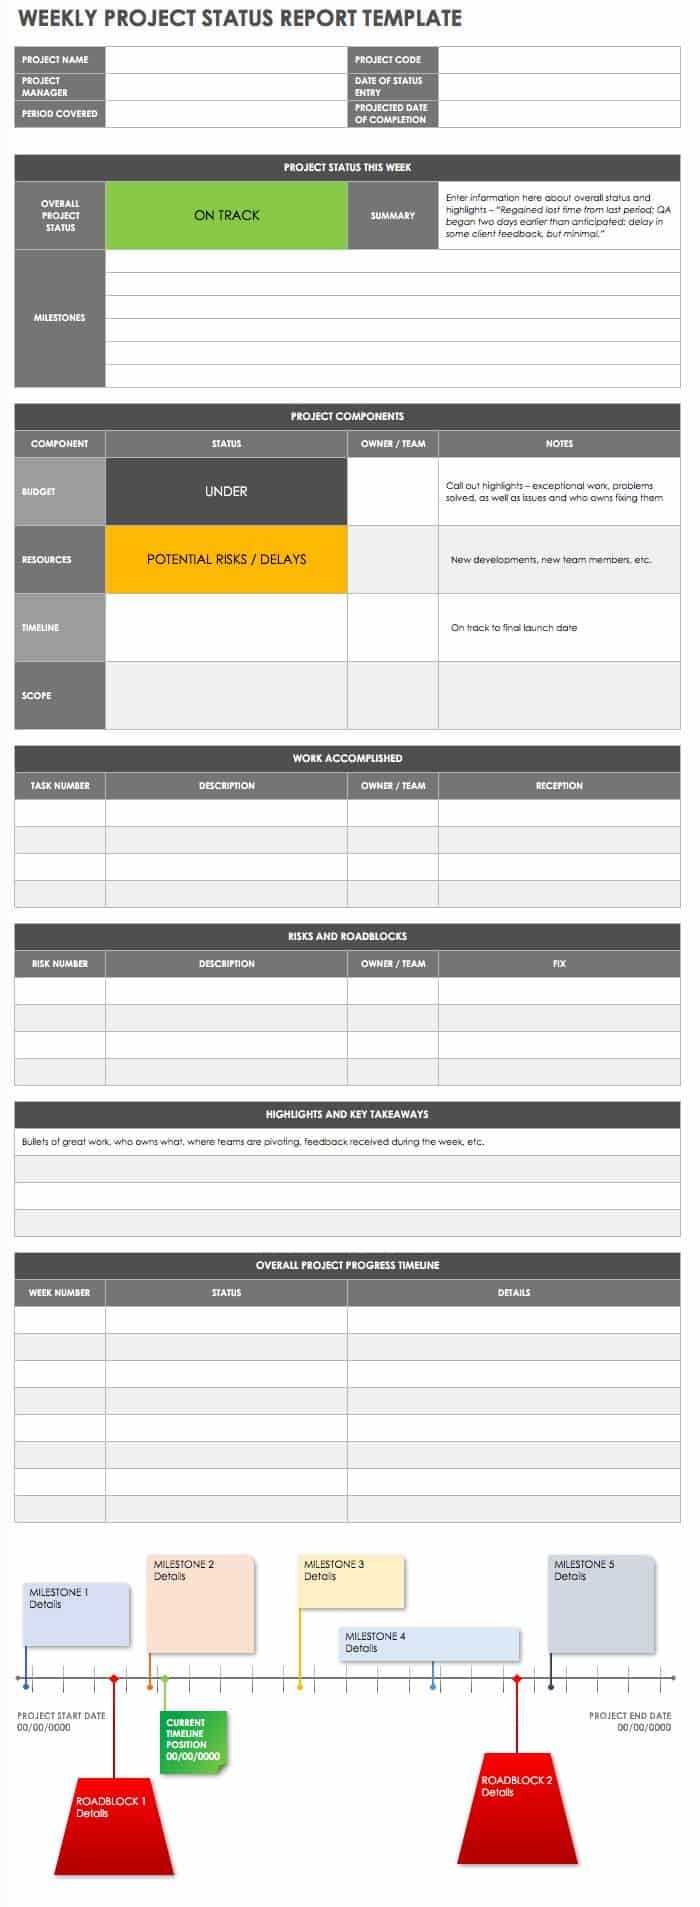 Free Project Report Templates | Smartsheet In Executive Summary Project Status Report Template